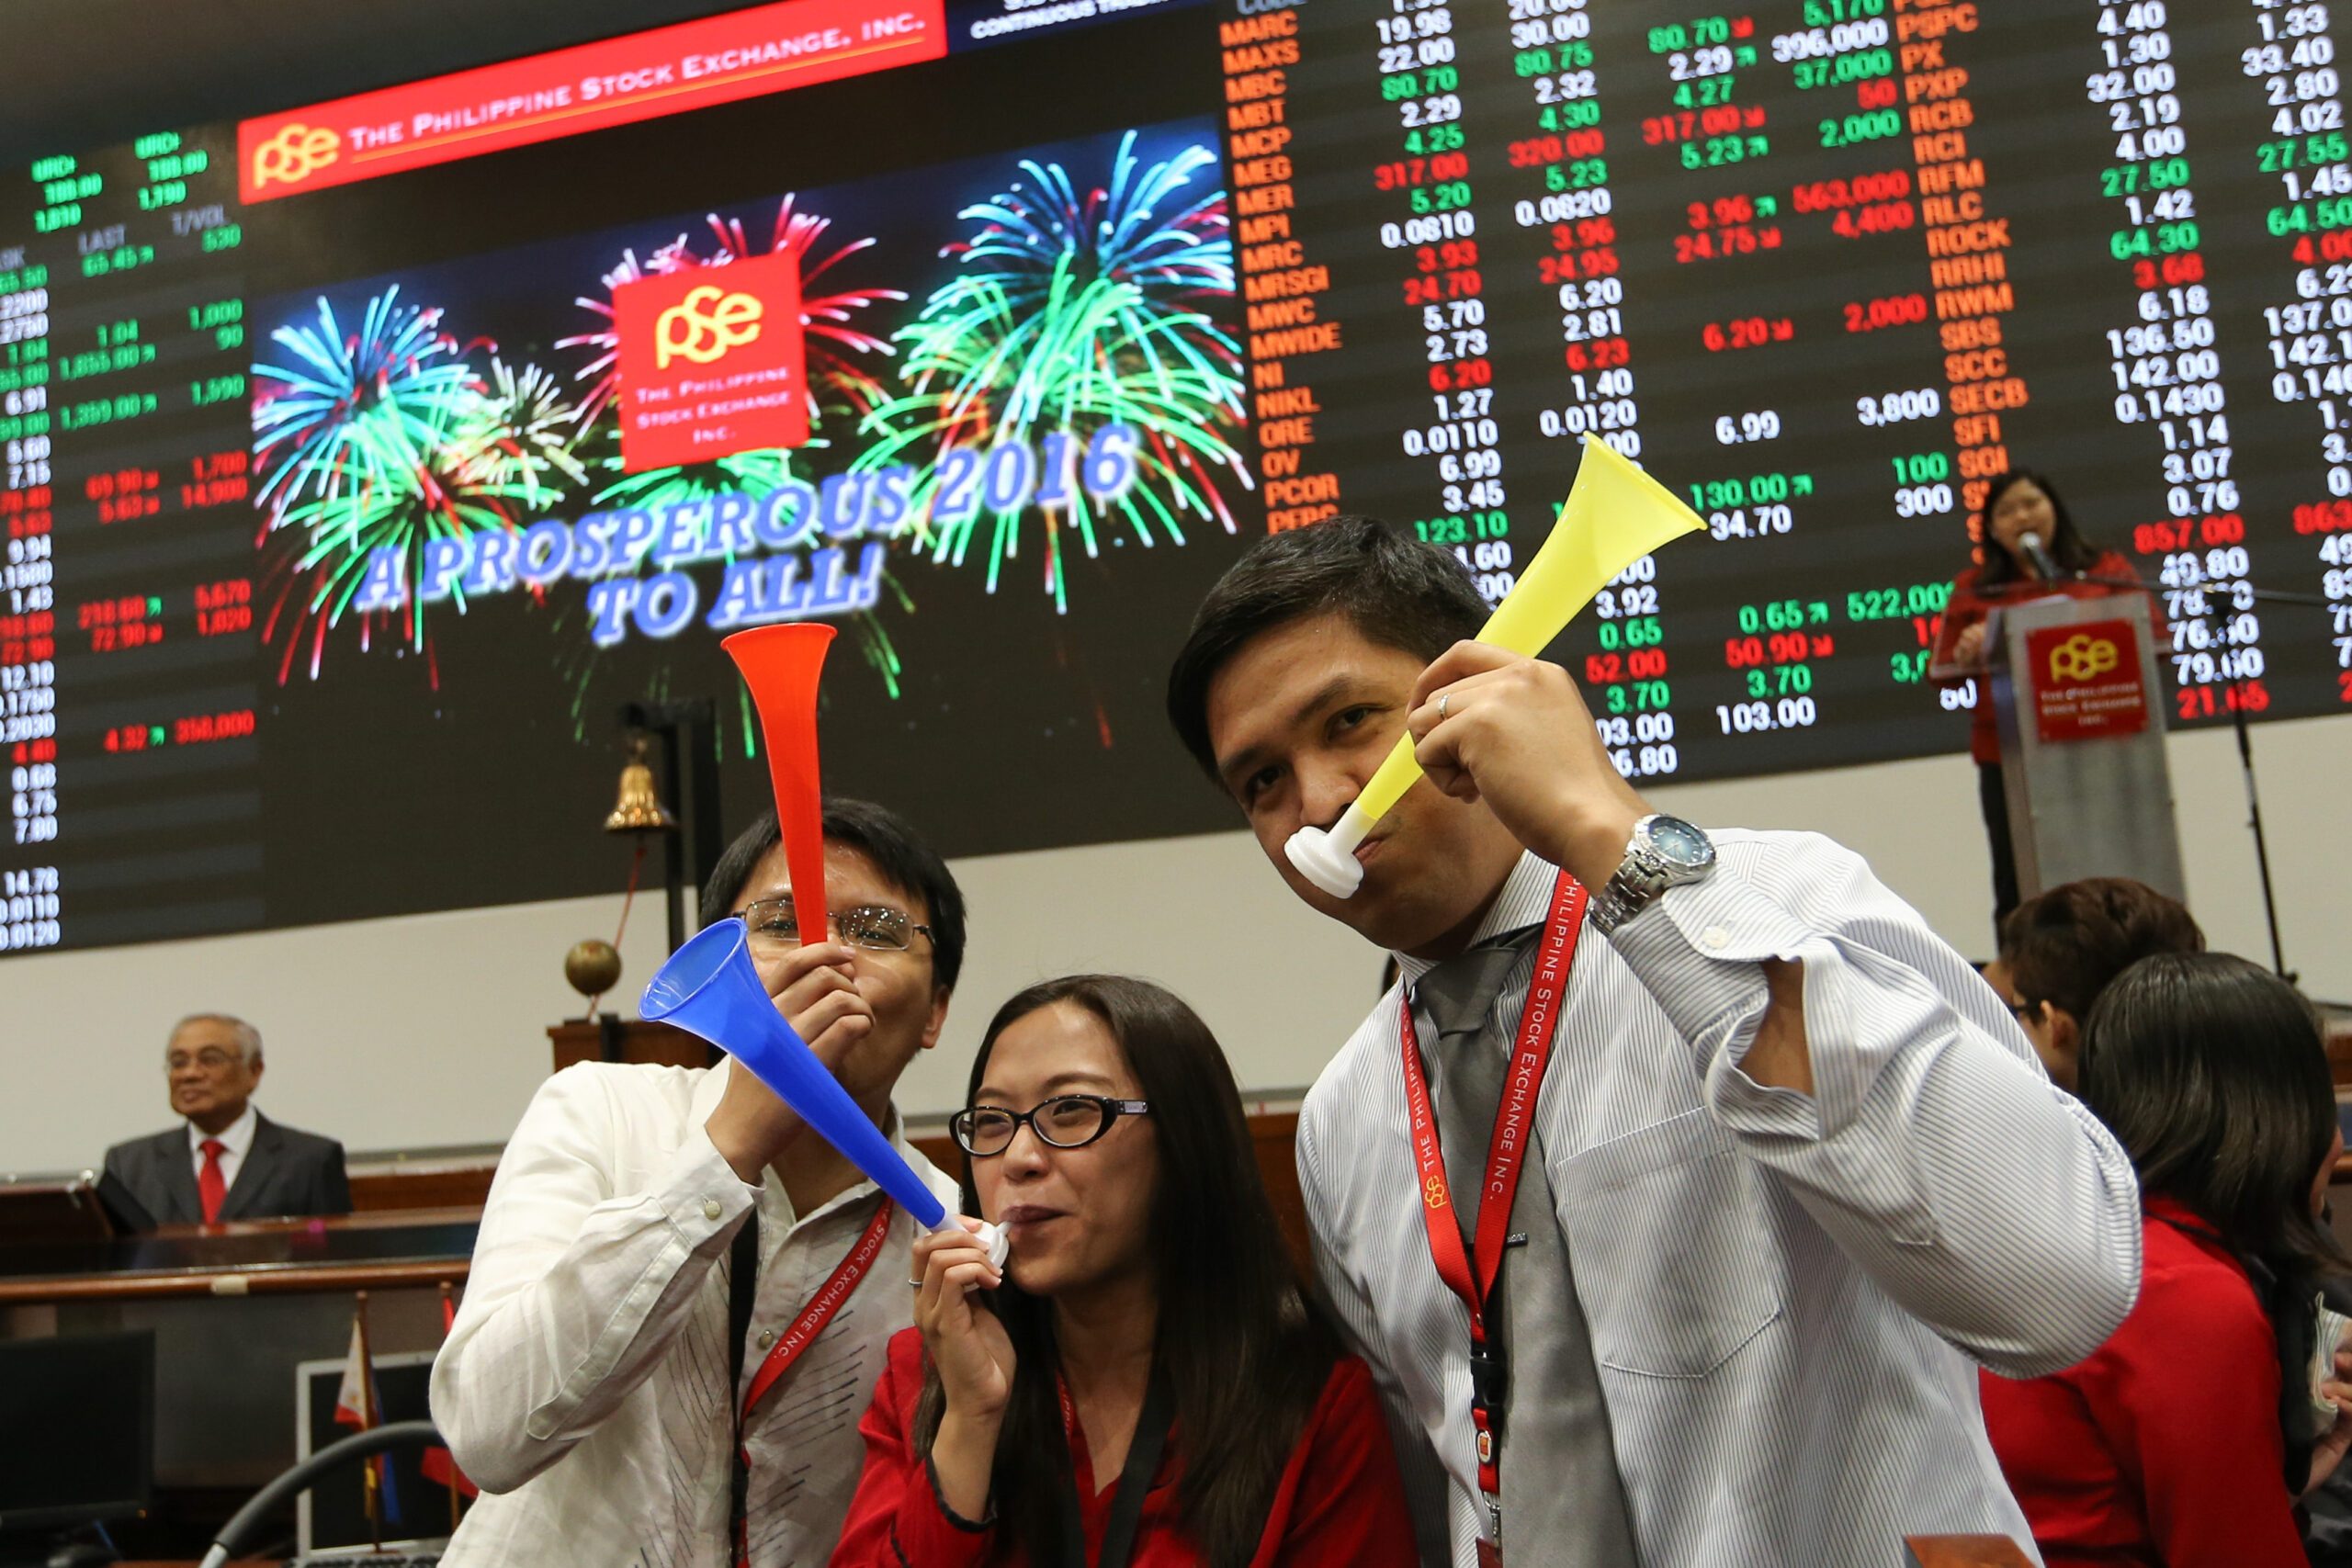 PSE named 2015 best stock exchange in Southeast Asia